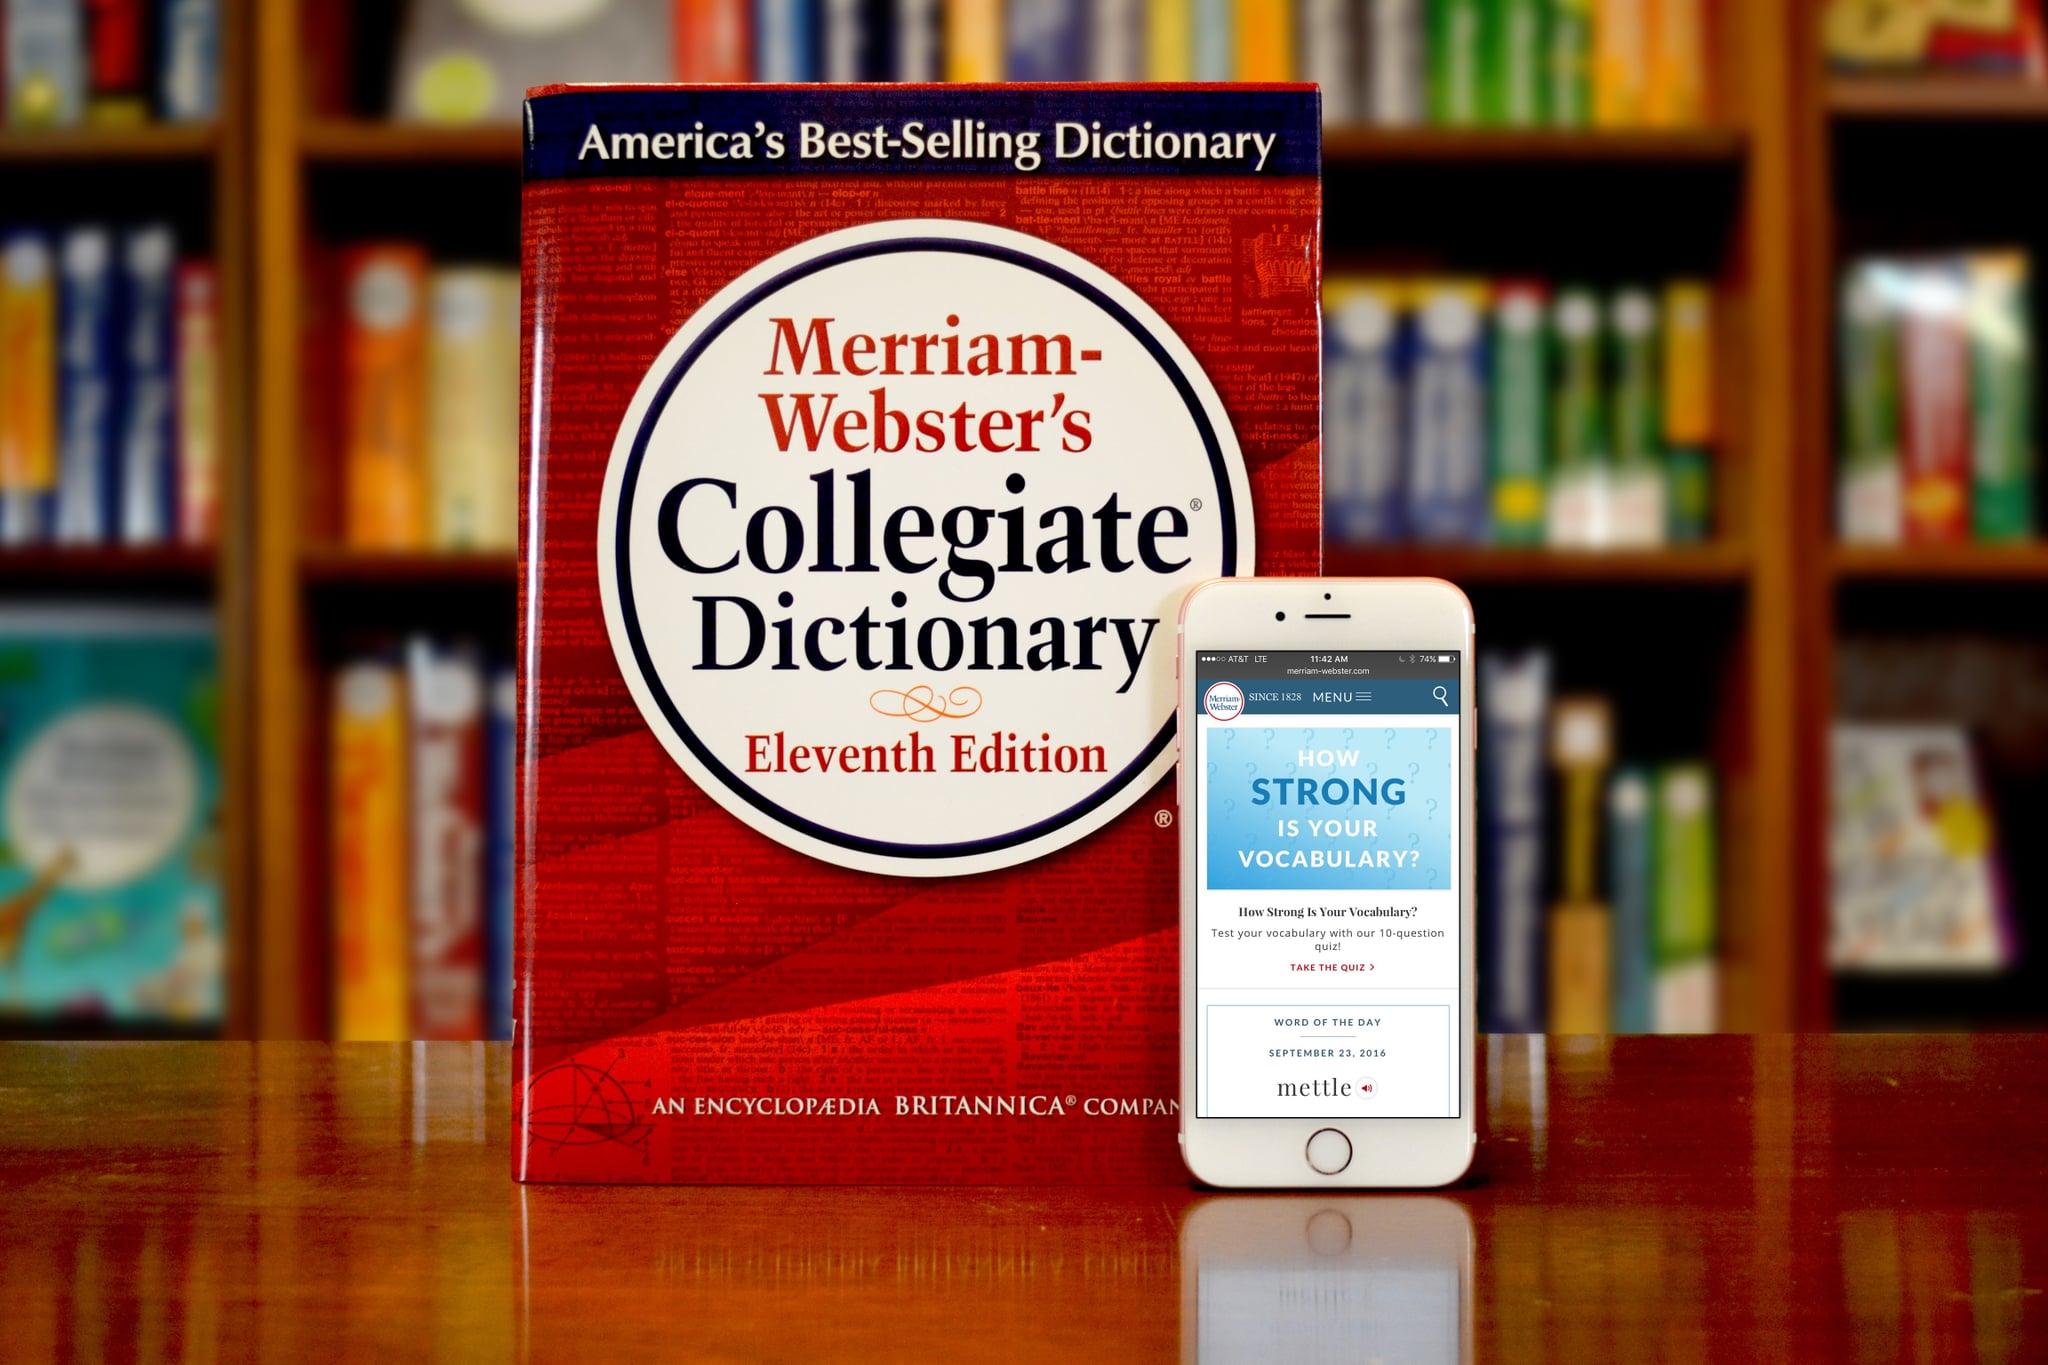 SPRINGFIELD, MA - SEPTEMBER 23: In this handout image provided by Merriam-Webster, Merriam-Webster's Collegiate Dictionary and mobile website are displayed September 23, 2016 in Springfield, Massachusetts.  (Photo by Joanne K. Watson/Merriam-Webster via Getty Images)